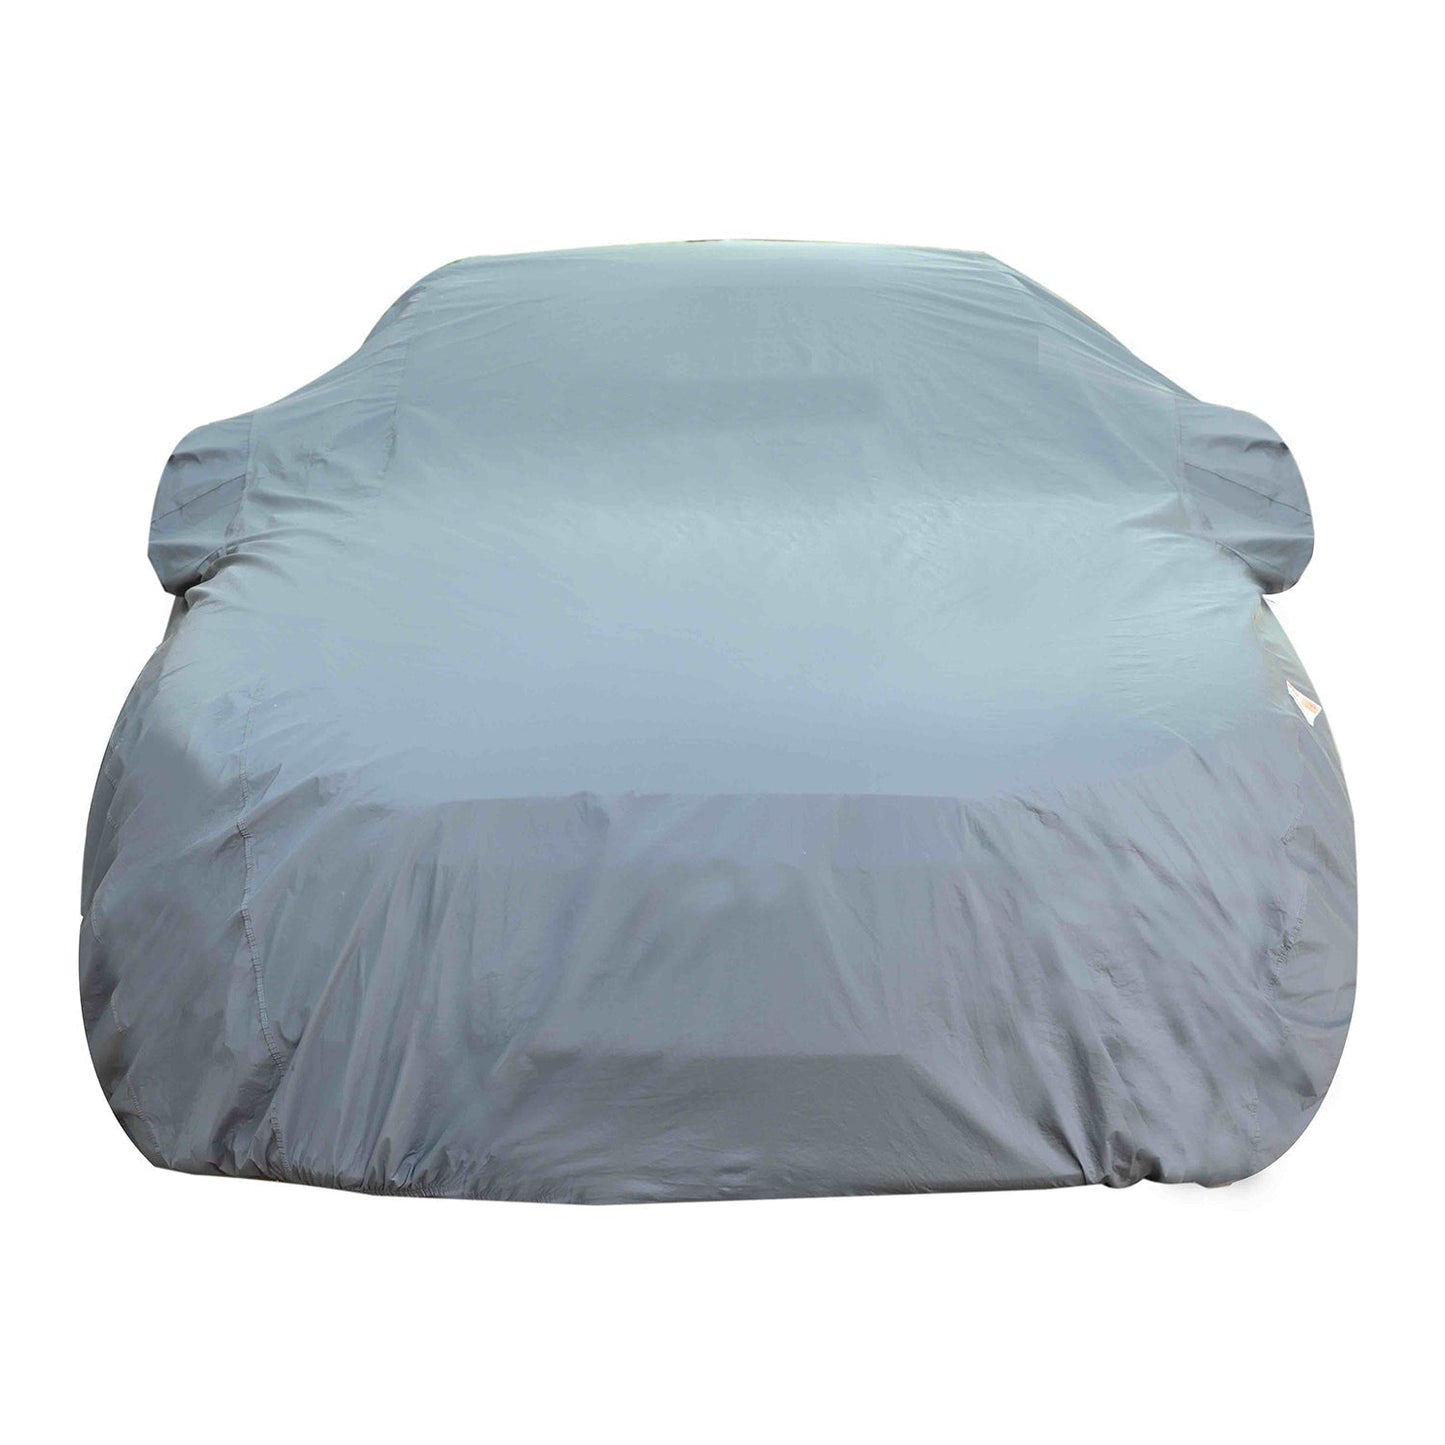 Oshotto Dark Grey 100% Anti Reflective, dustproof and Water Proof Car Body Cover with Mirror Pockets For Volkswagen Tiguan